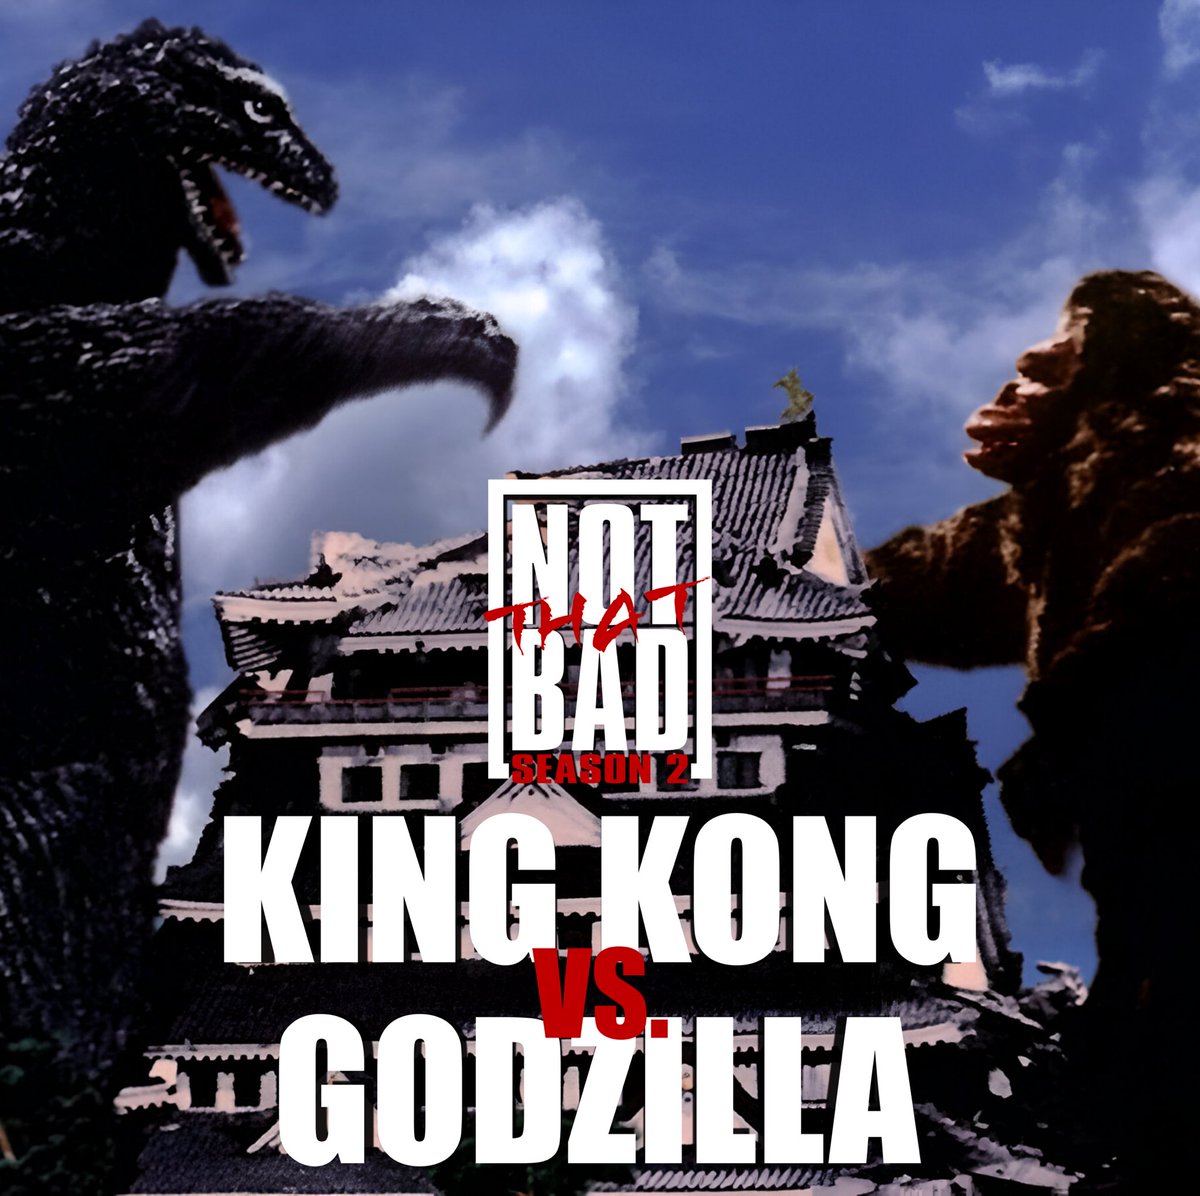 Get ready for war as we dive in to the ultimate big boi battle in 1963’s King Kong vs. Godzilla!

open.spotify.com/episode/2RftwC…

podcasts.apple.com/us/podcast/not…

youtu.be/xPMP-aux0CI?si…

#Godzilla #KingKong #GodzillaVsKong #Kong #podcast #notthatbad